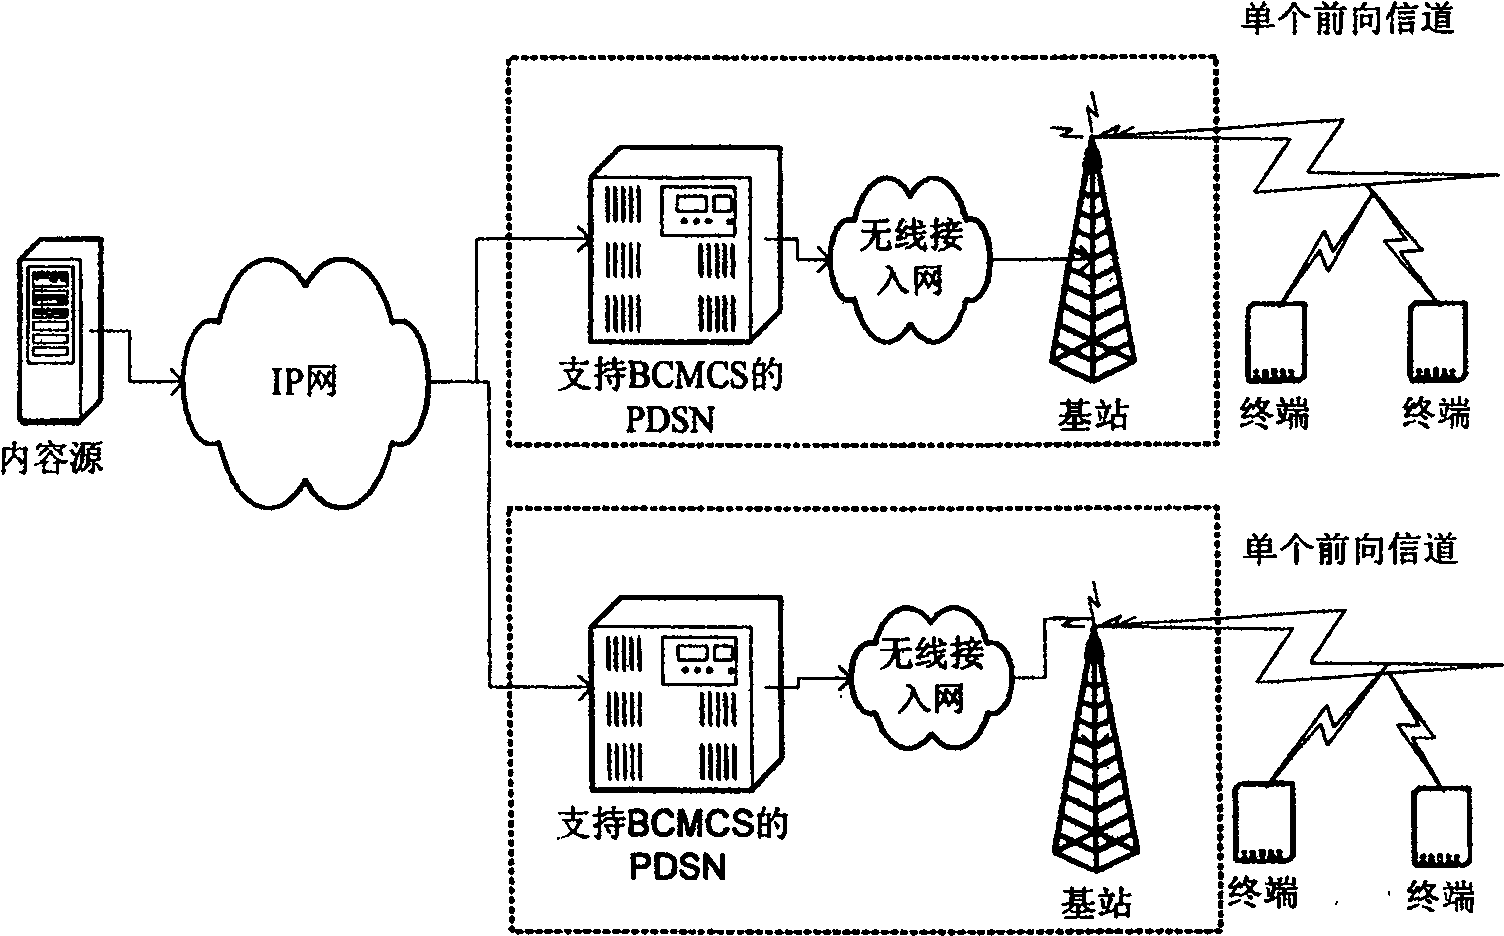 A method for content protection of the handset TV service